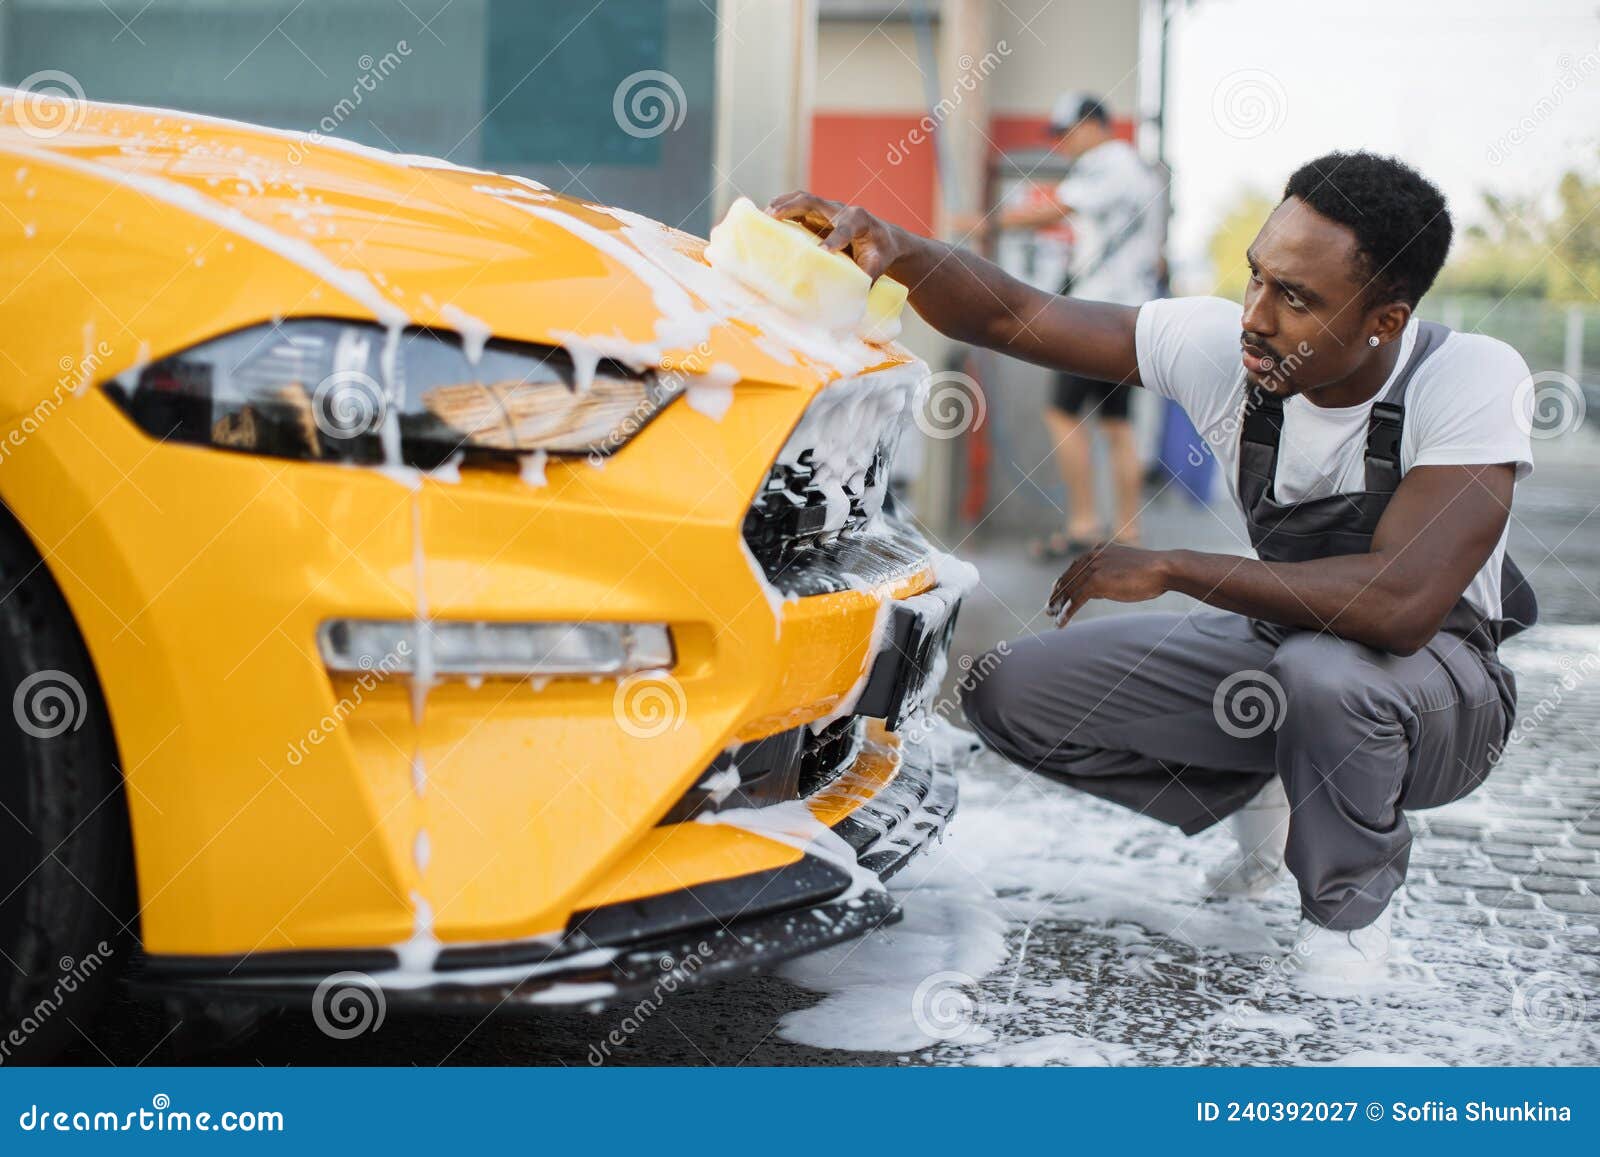 Sige Twisted onsdag Car Detailing Wash at Outdoors Car Wash Service. Stock Image - Image of  clean, foam: 240392027